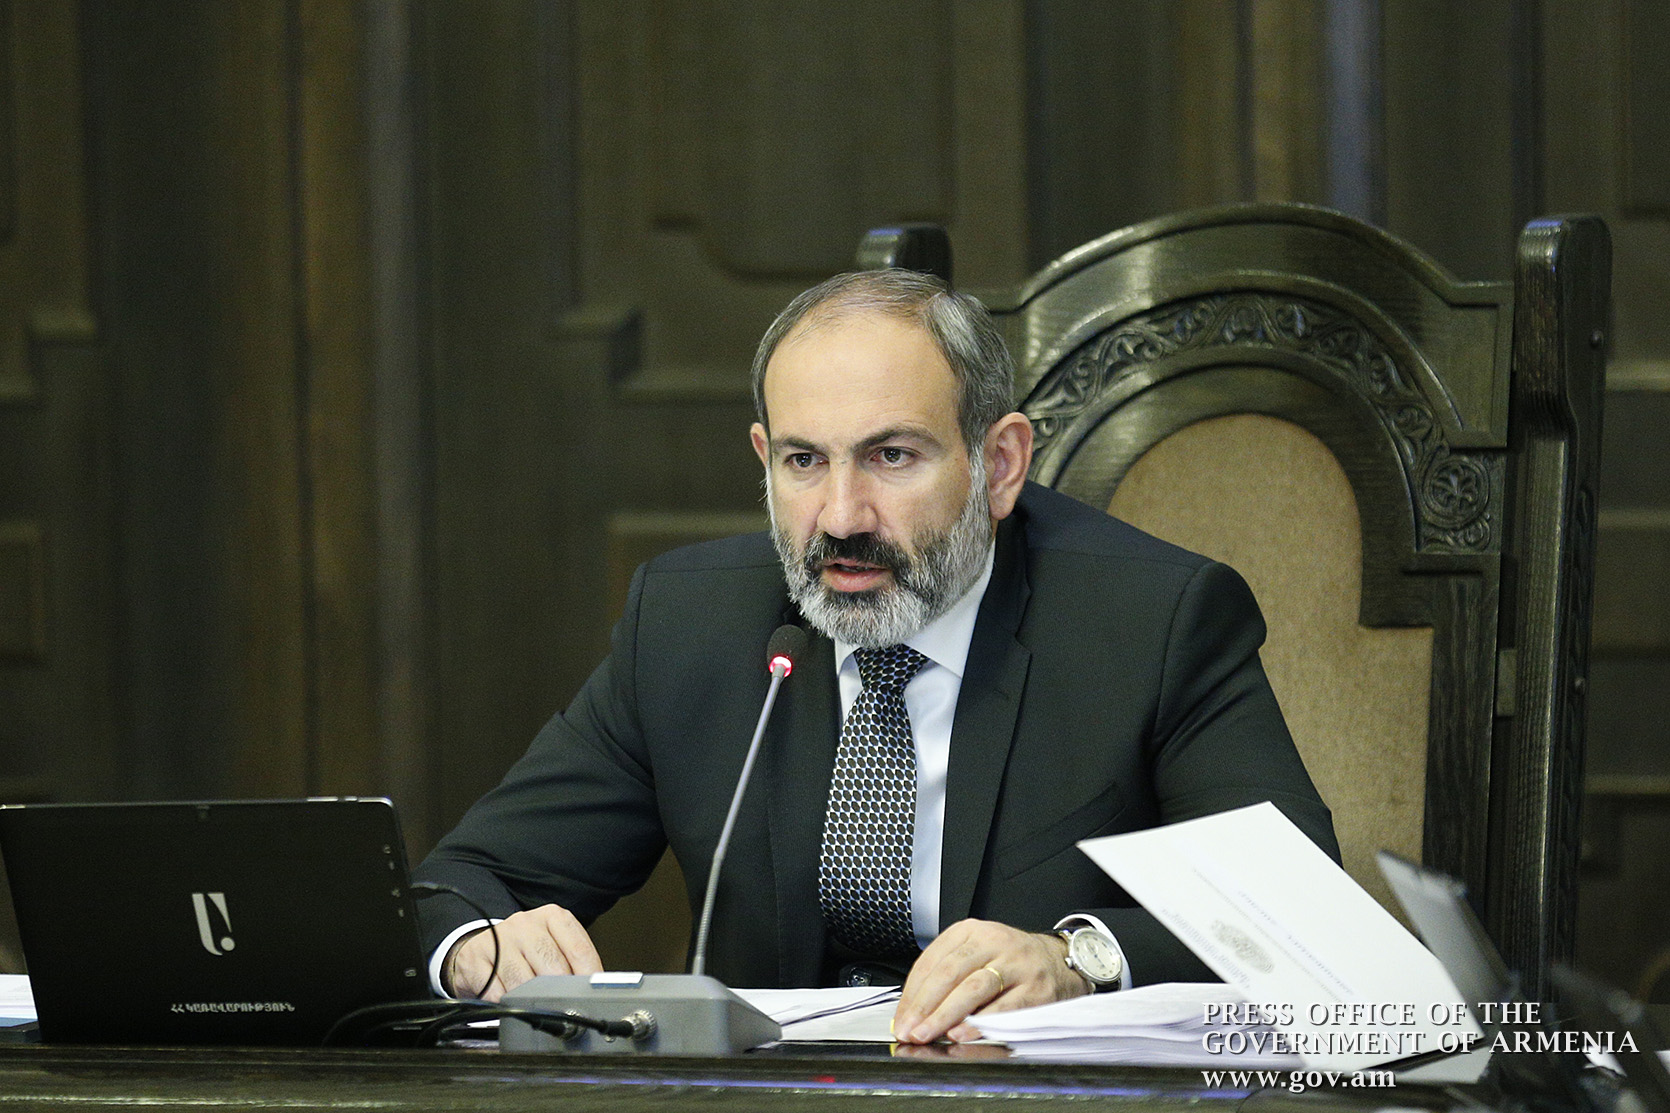 Nikol Pashinyan outlines Government’s tasks: investment incentives, army development, poverty reduction